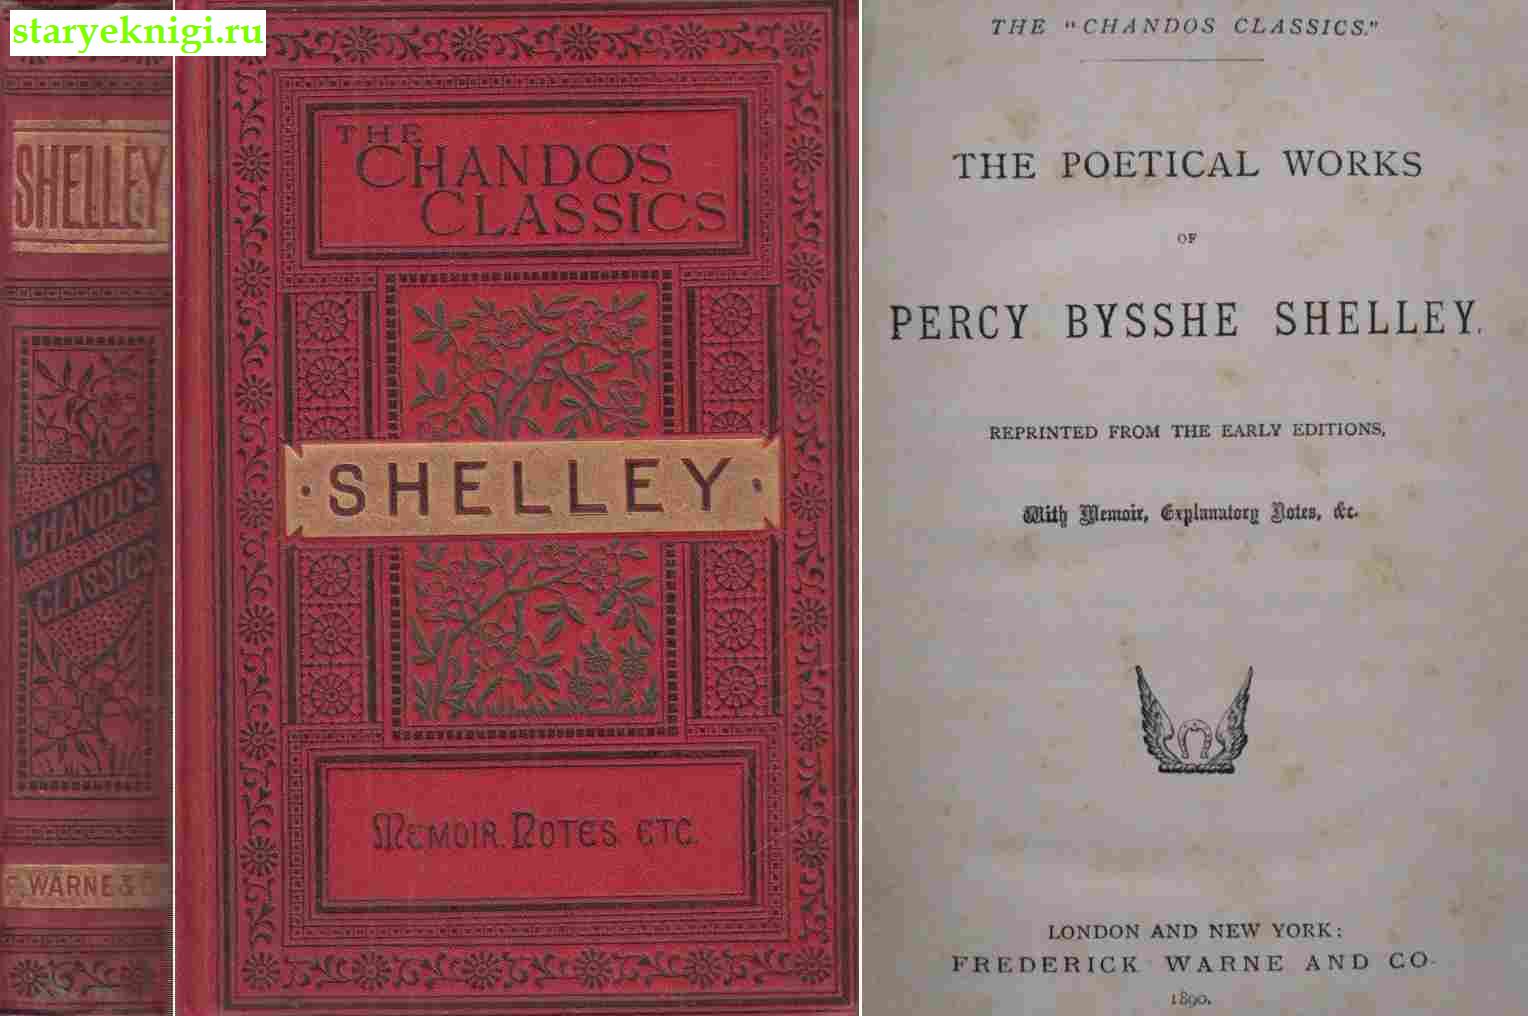 The poetical works of Percy Bysshe Shelley,  -  